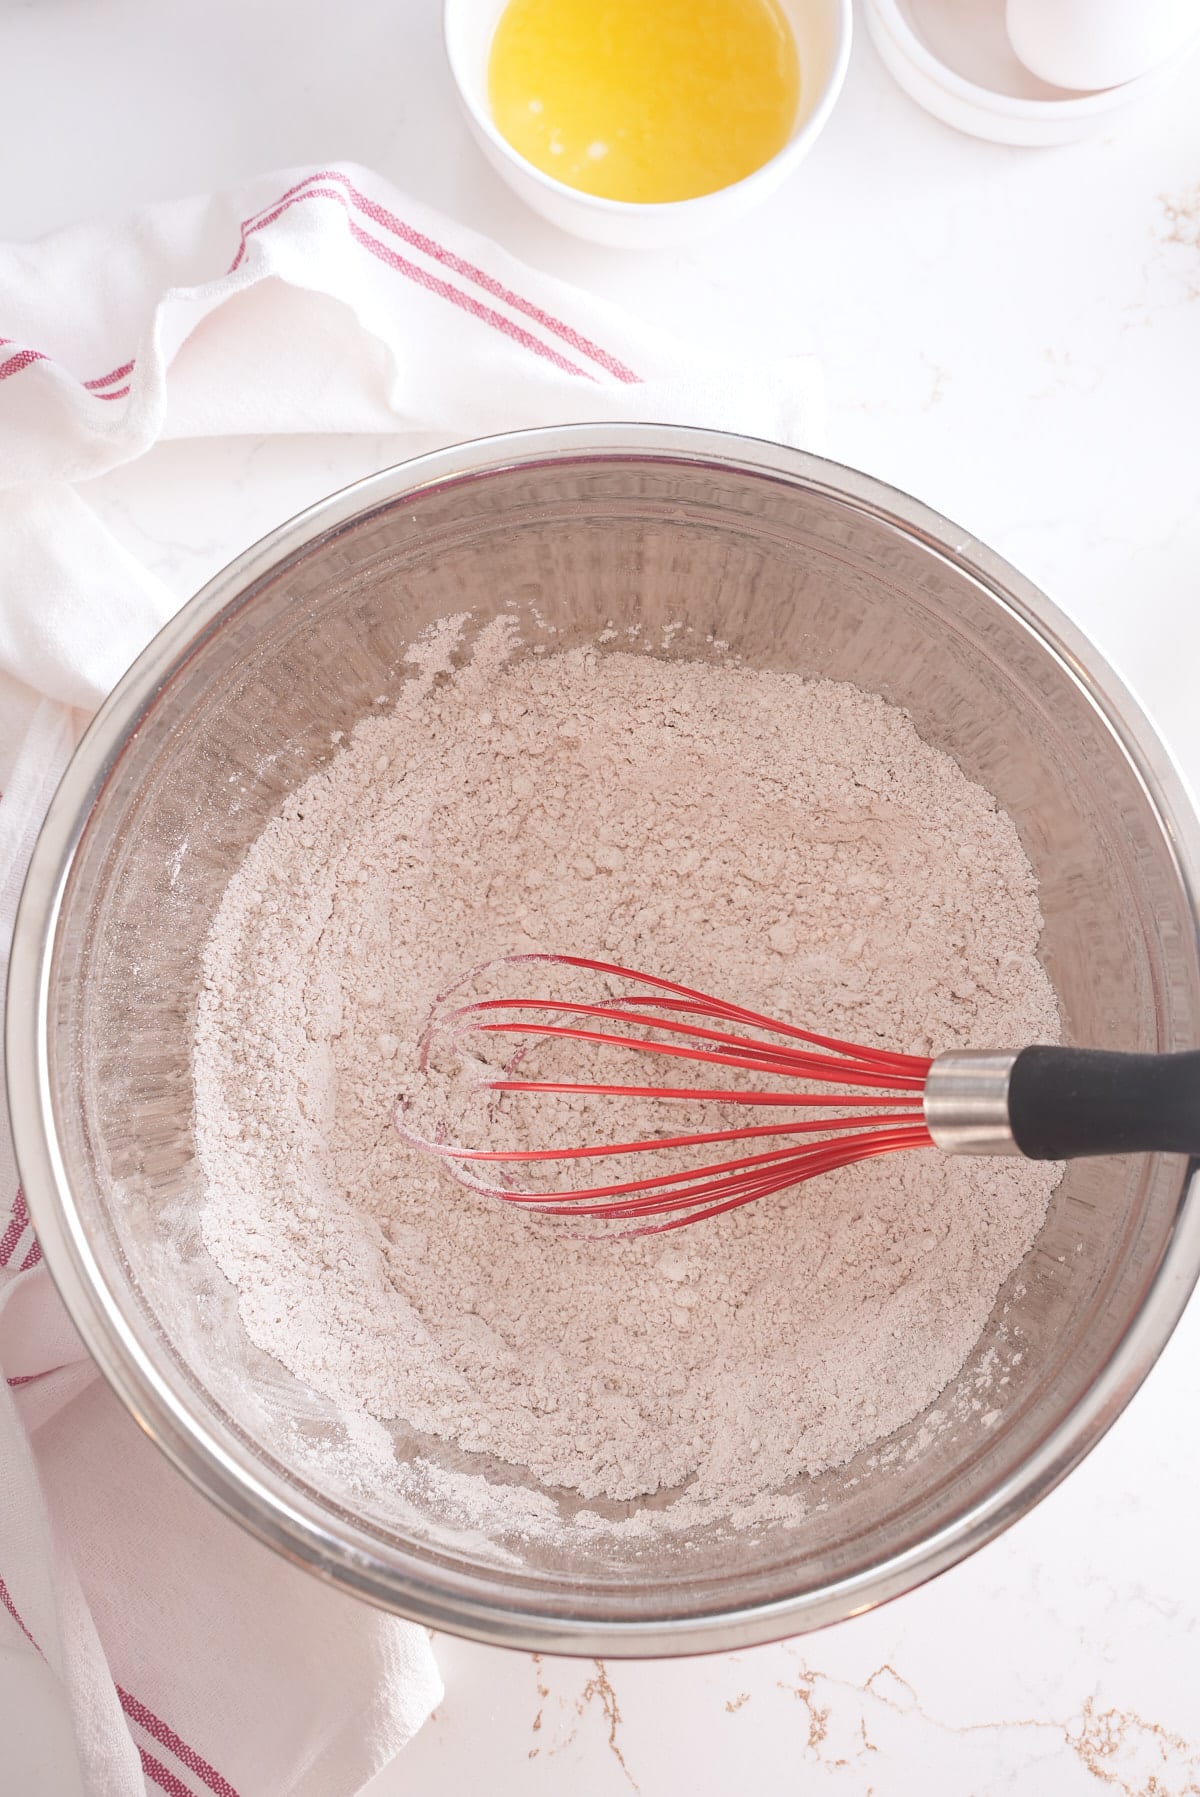 A whisk and bowl of combines flour, baking powder, spice and salt.